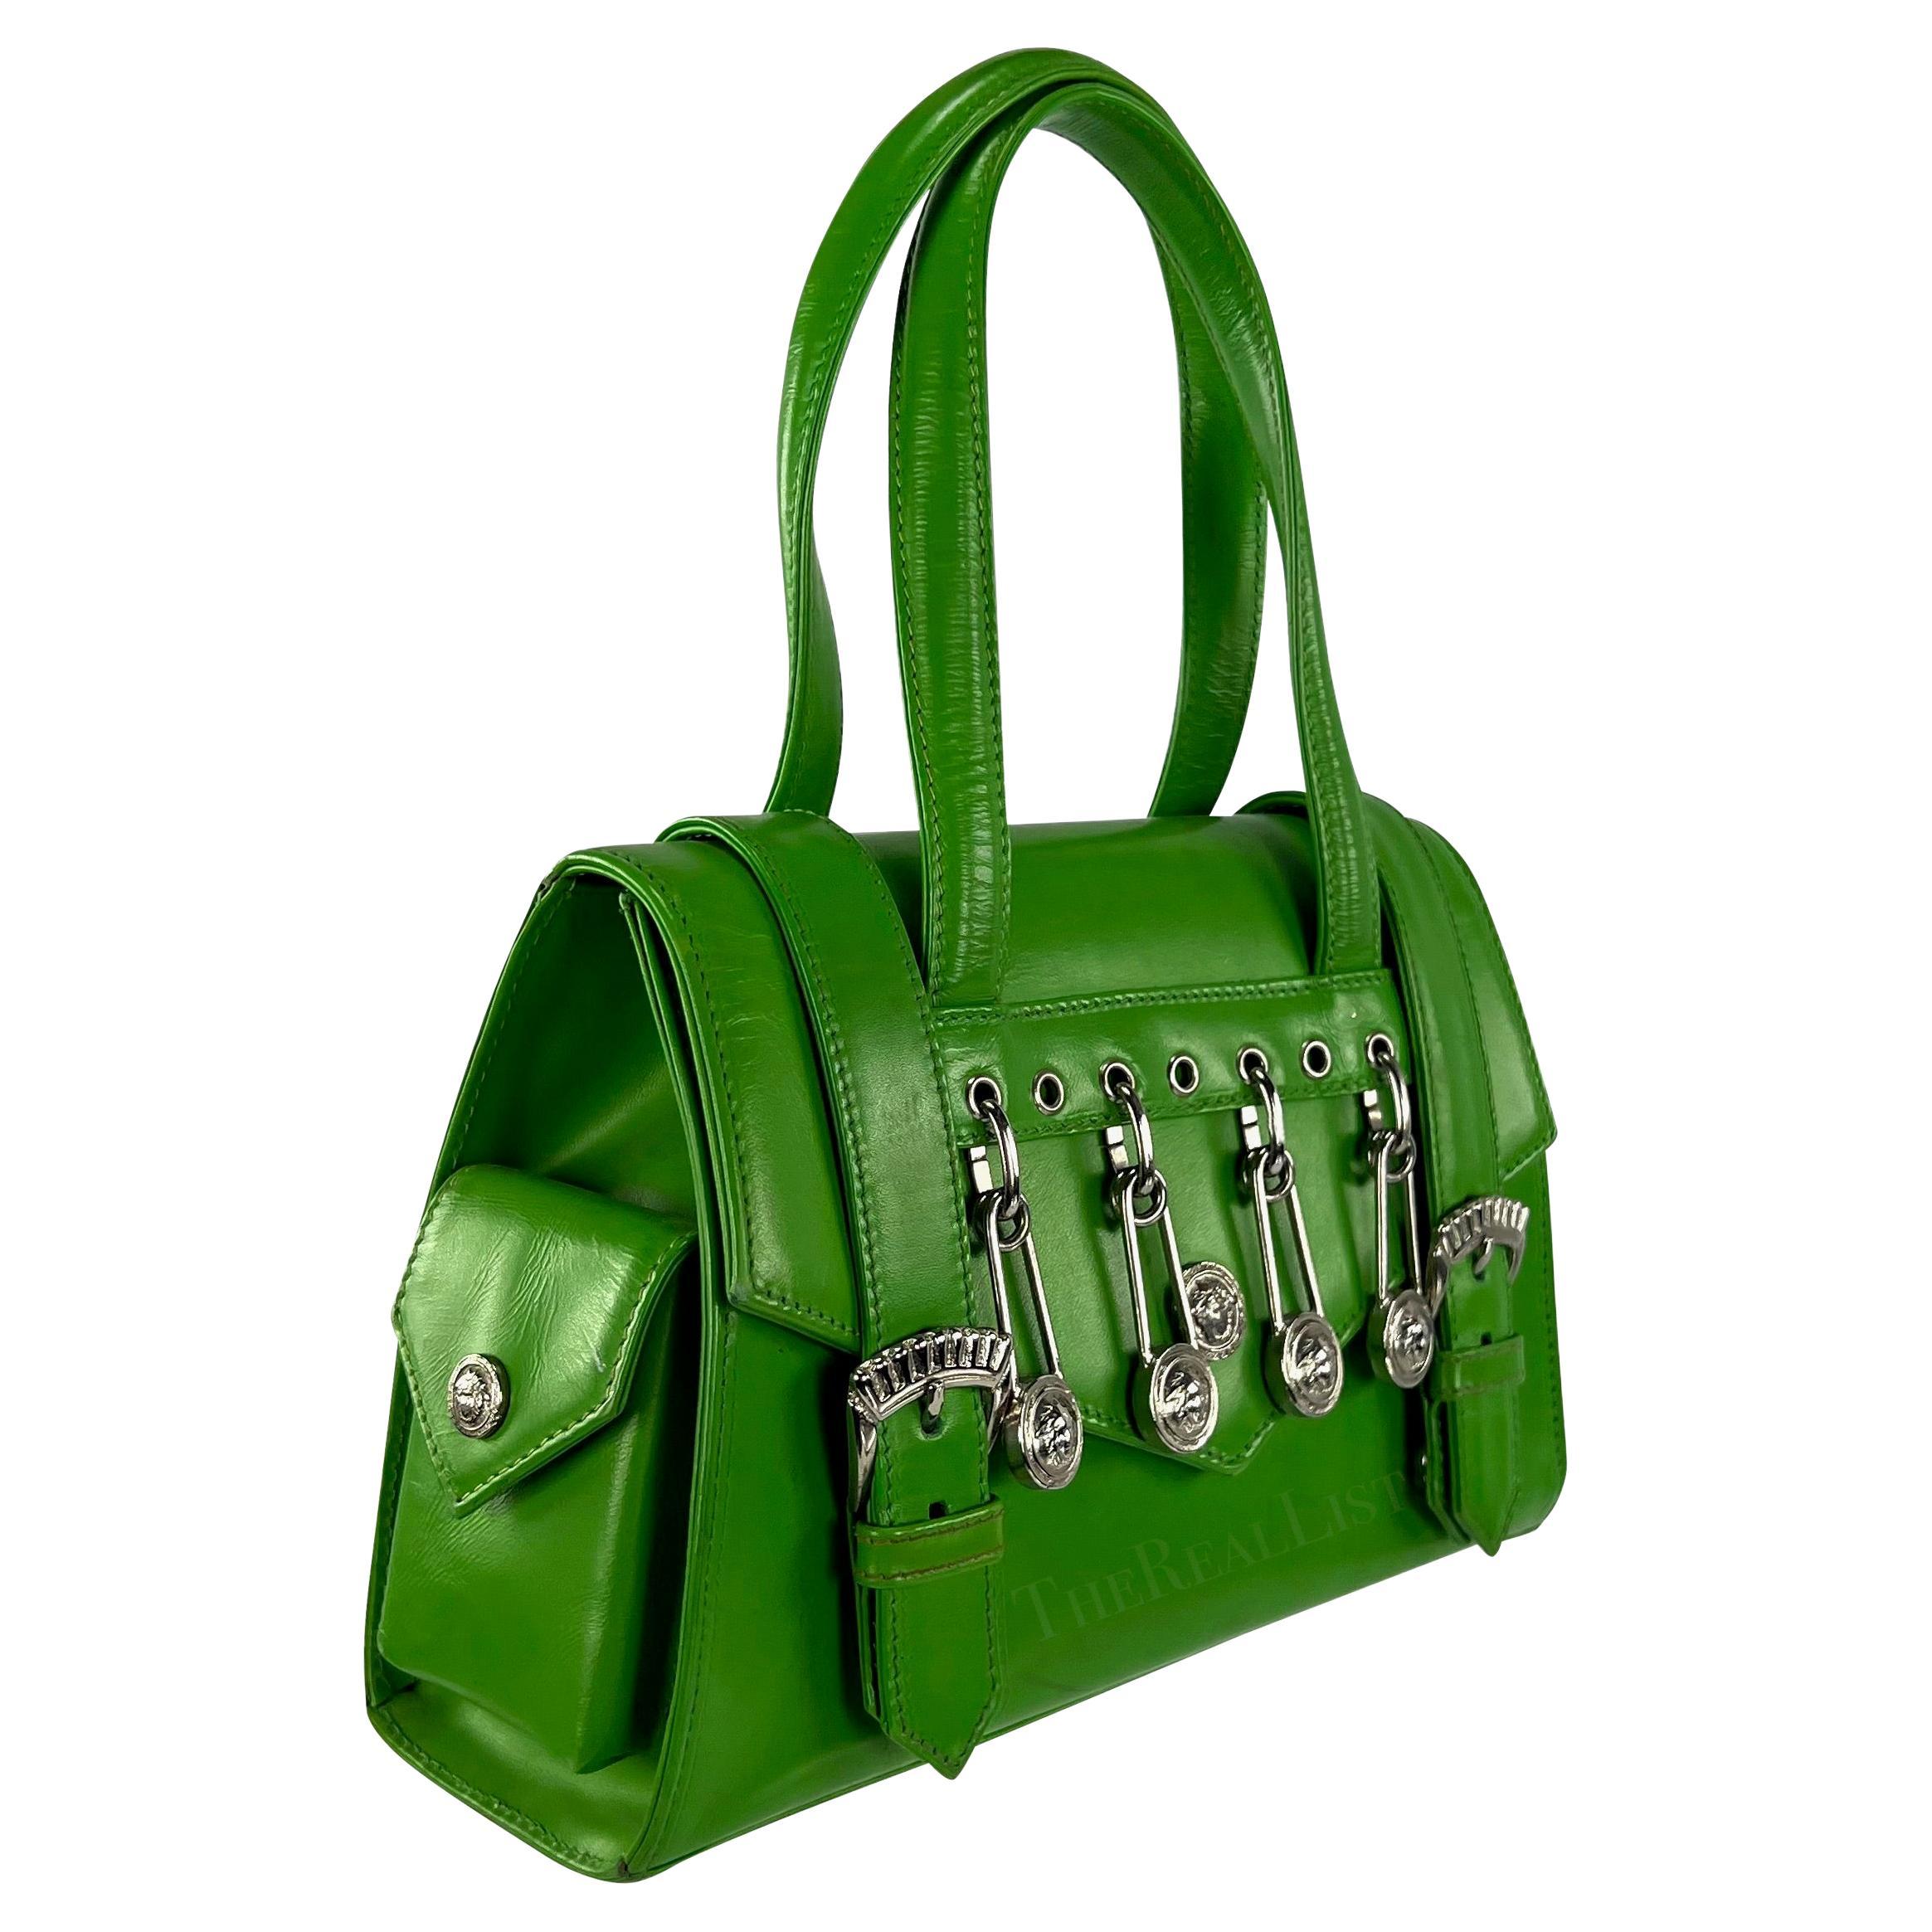 S/S 1994 Gianni Versace Vintage Mini Green Leather Safety Pin Bag For Sale 2